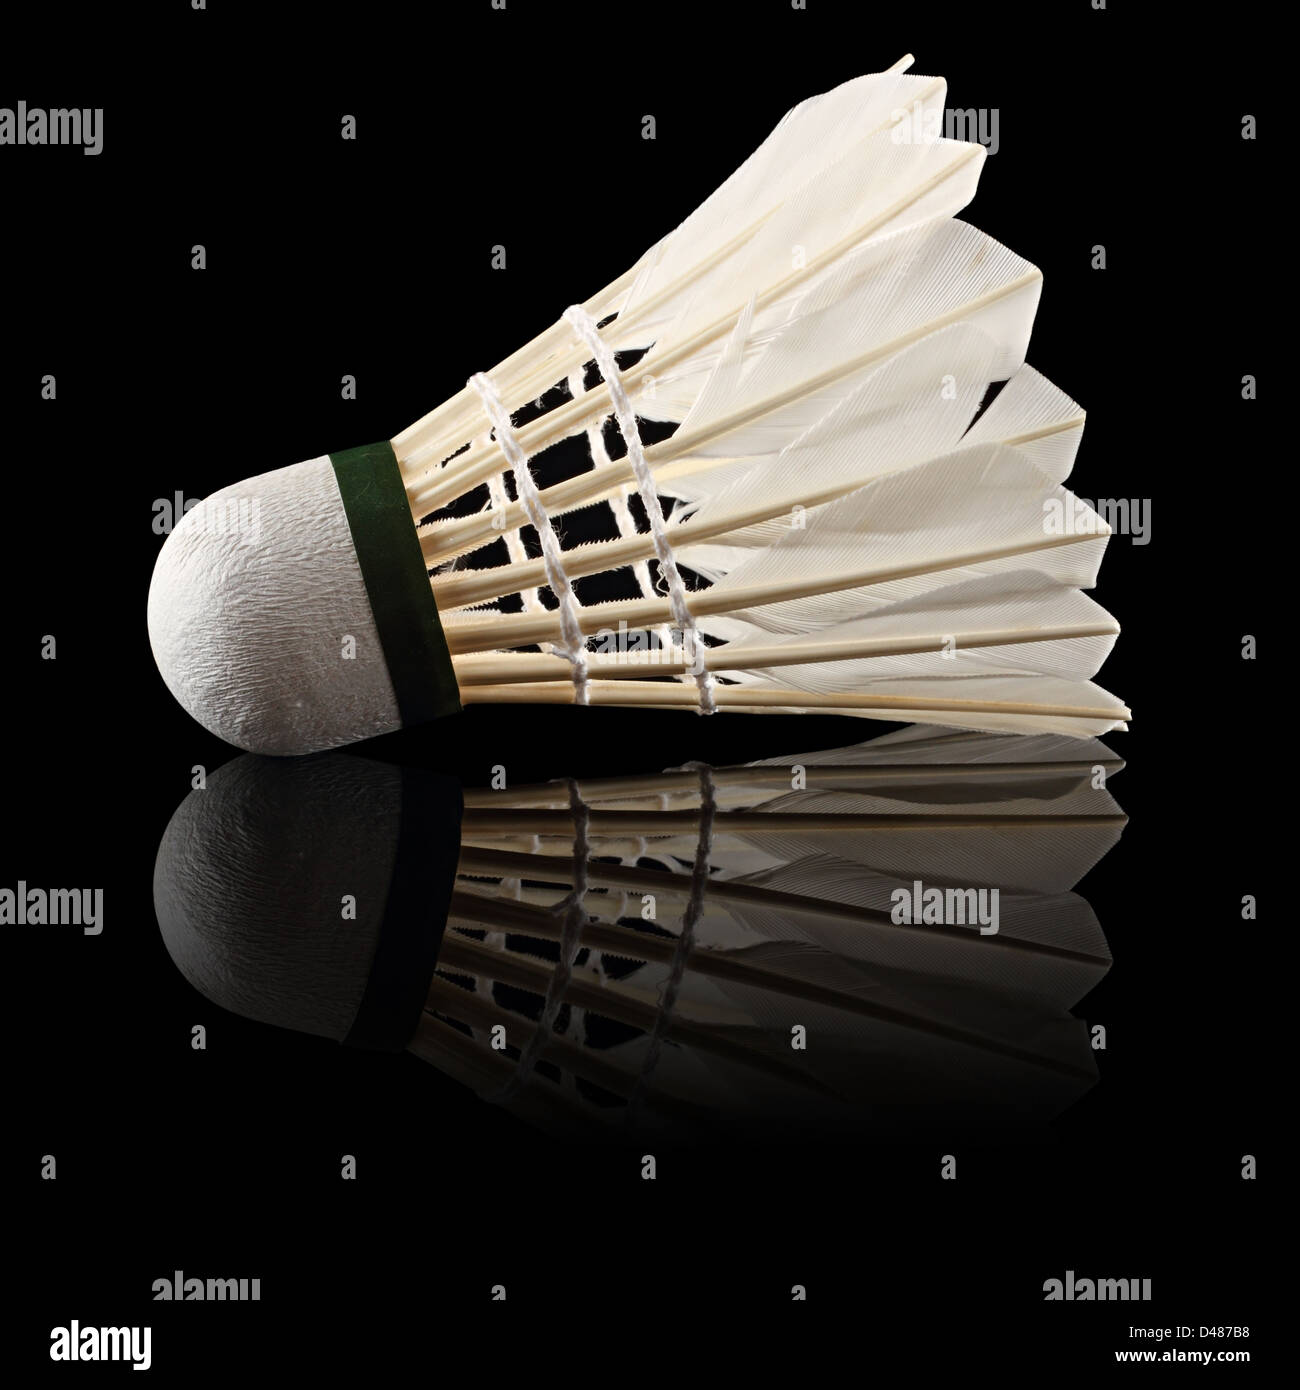 badminton ball in front of black background Stock Photo - Alamy